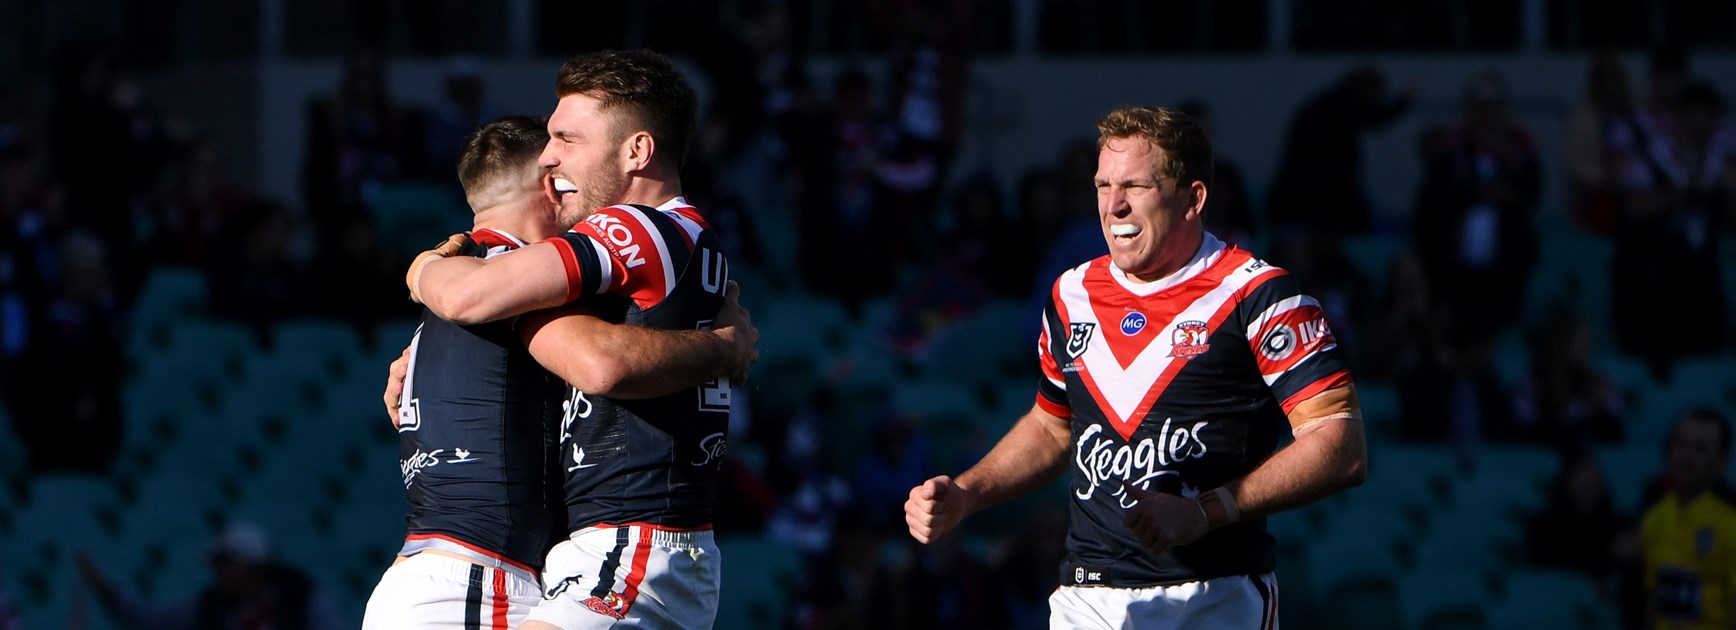 The Roosters celebrate a James Tedesco try.